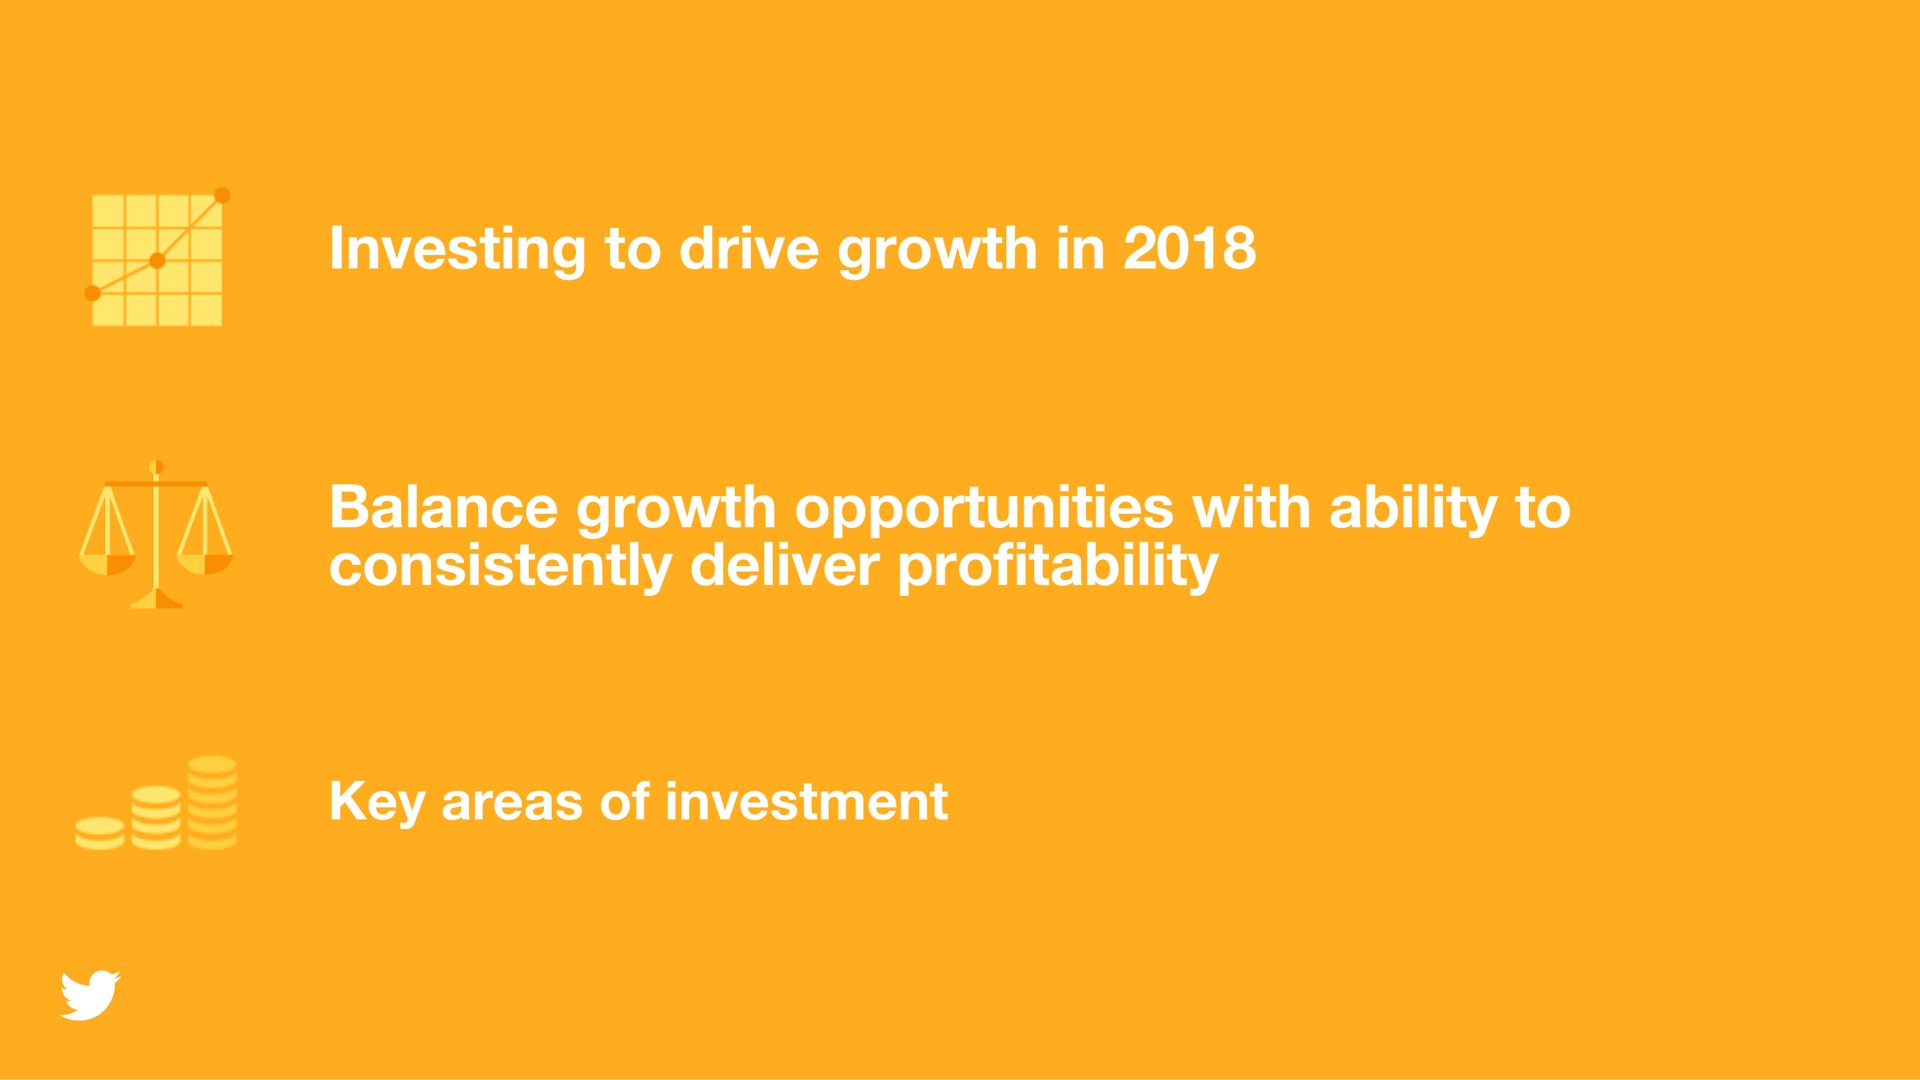 investing to drive growth in balance growth opportunities with ability to consistently deliver profitability key areas of investment con a alt | Twitter